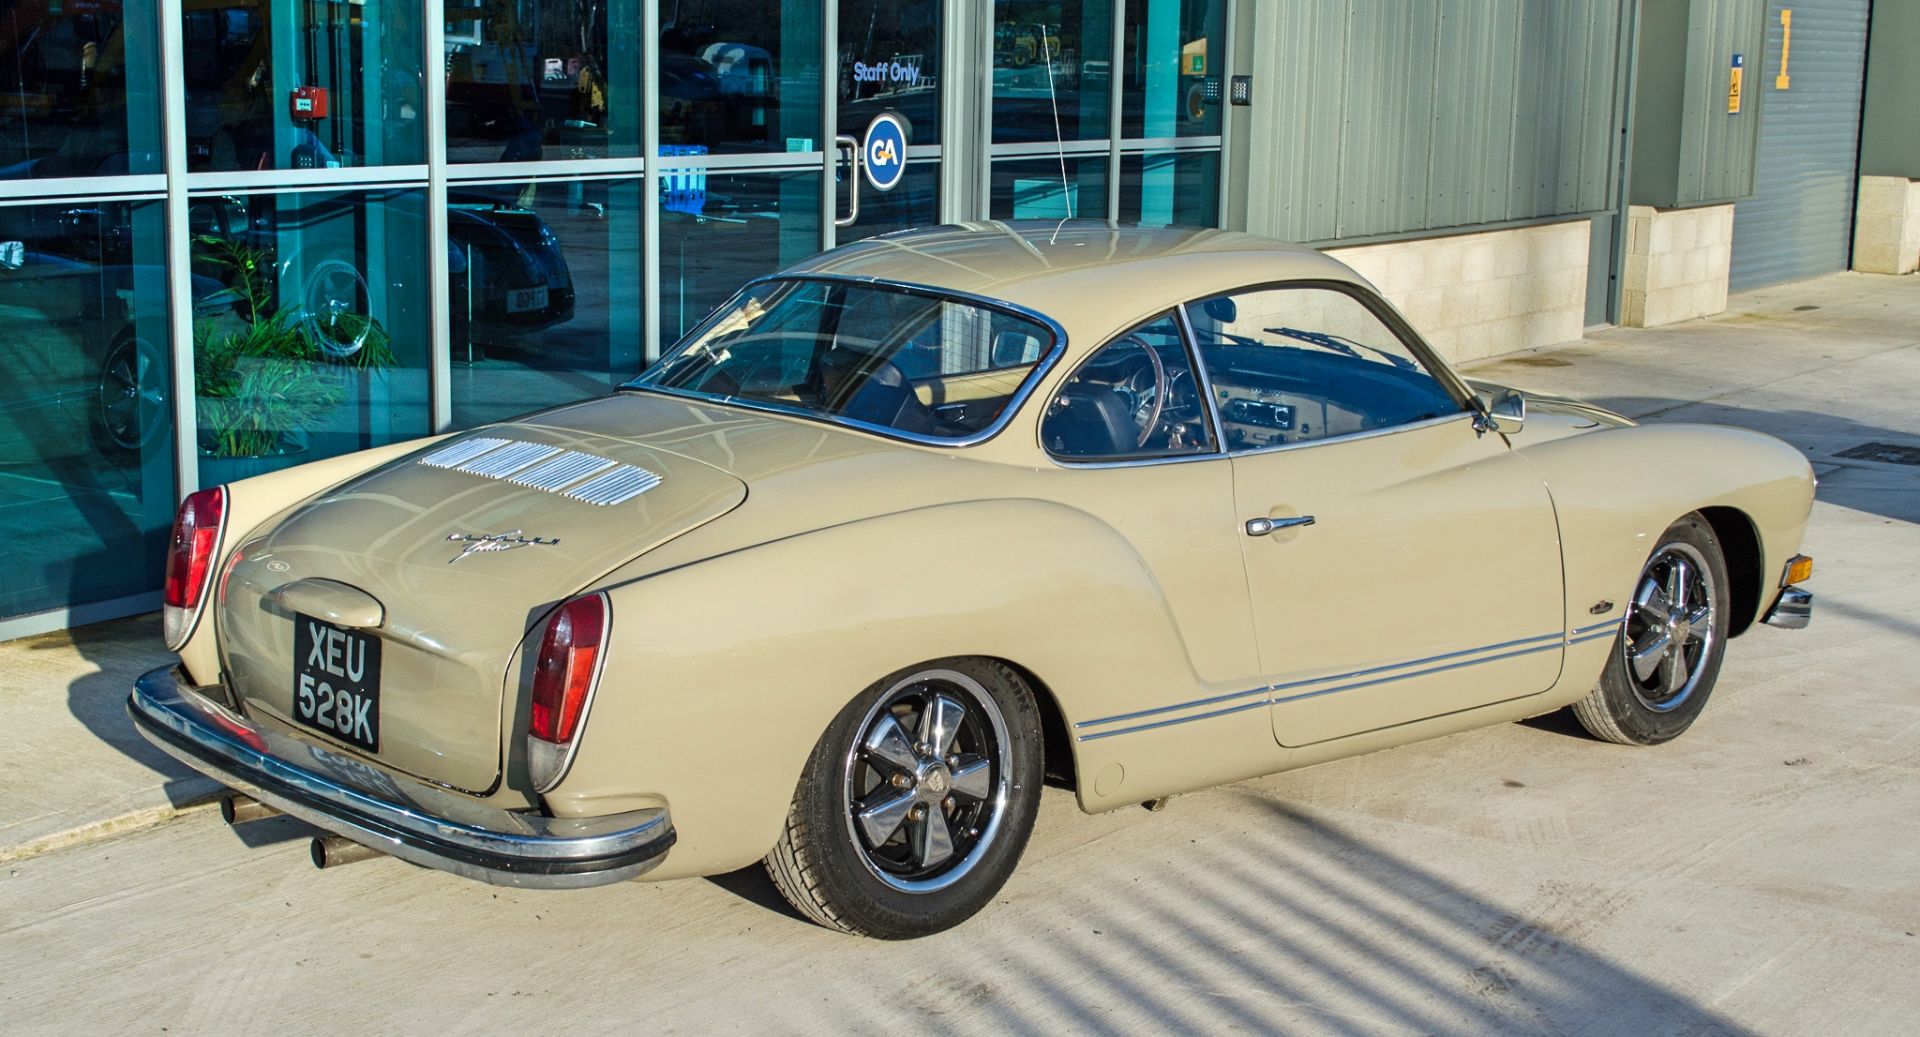 1972 Volkswagen Karmann Ghia 1641cc two door coupe - Image 6 of 52